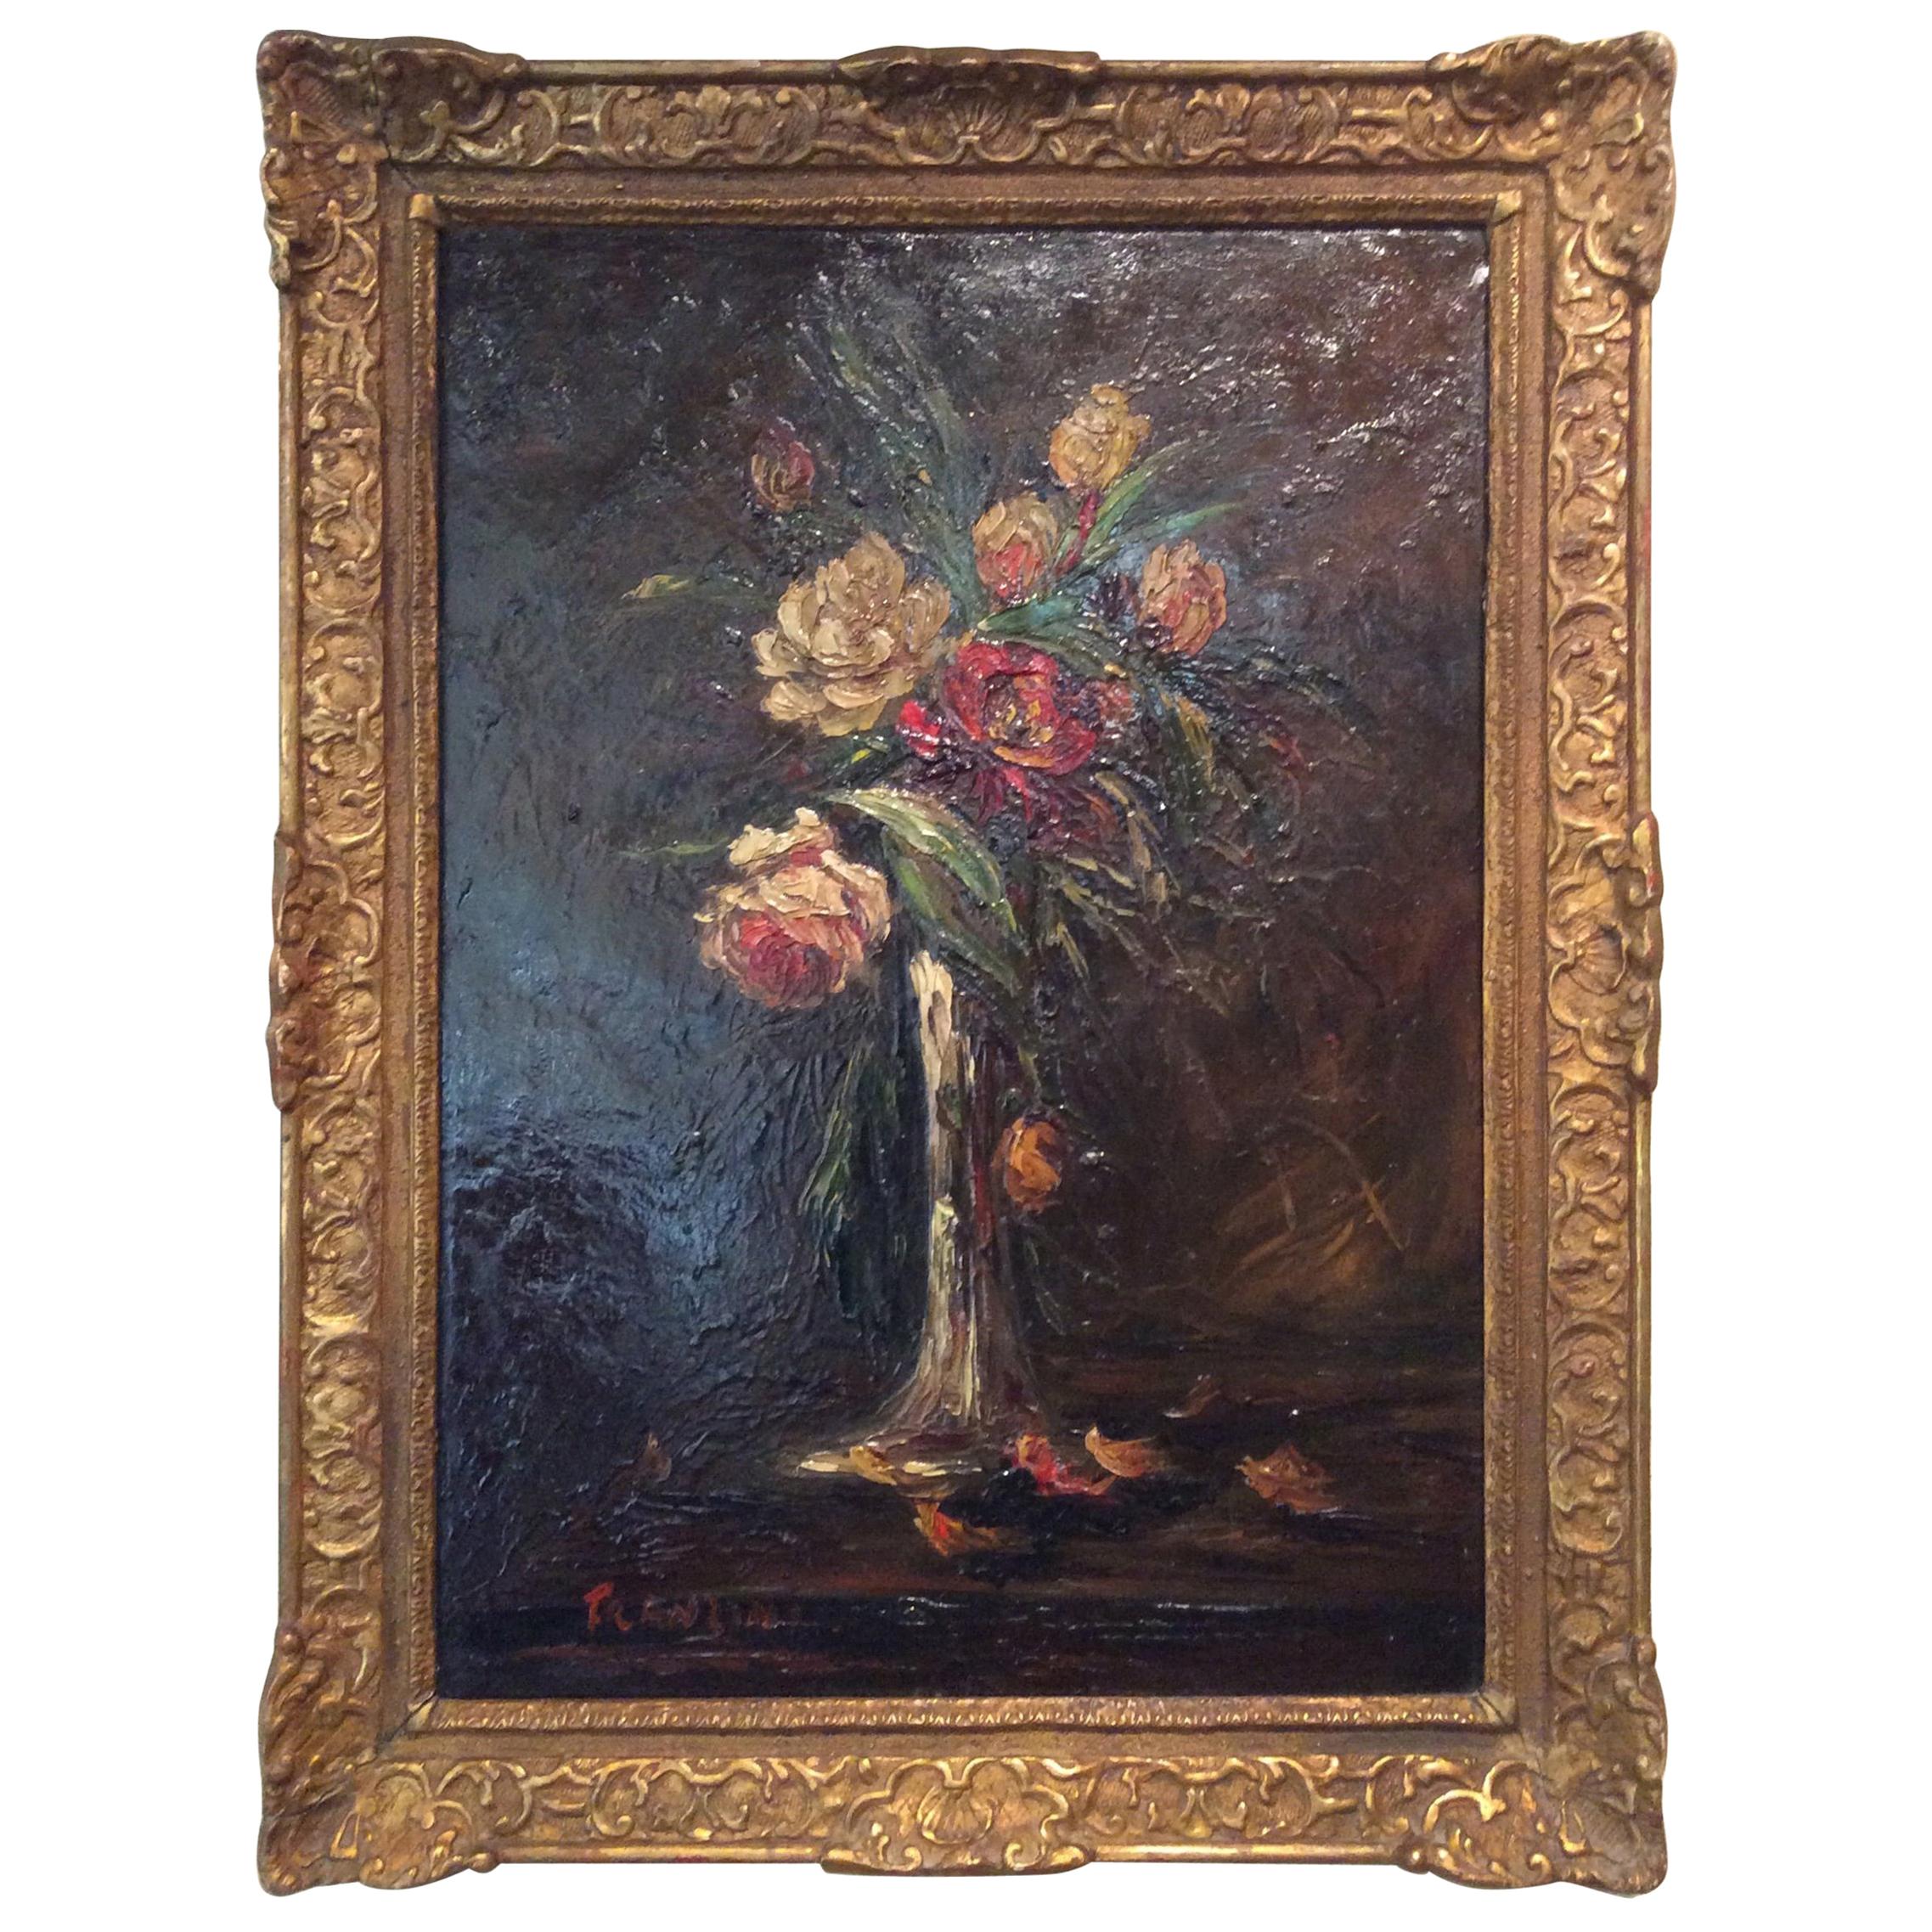 Ornately Giltwood Framed Floral Painting by Charles Franzini D’issoncourt For Sale